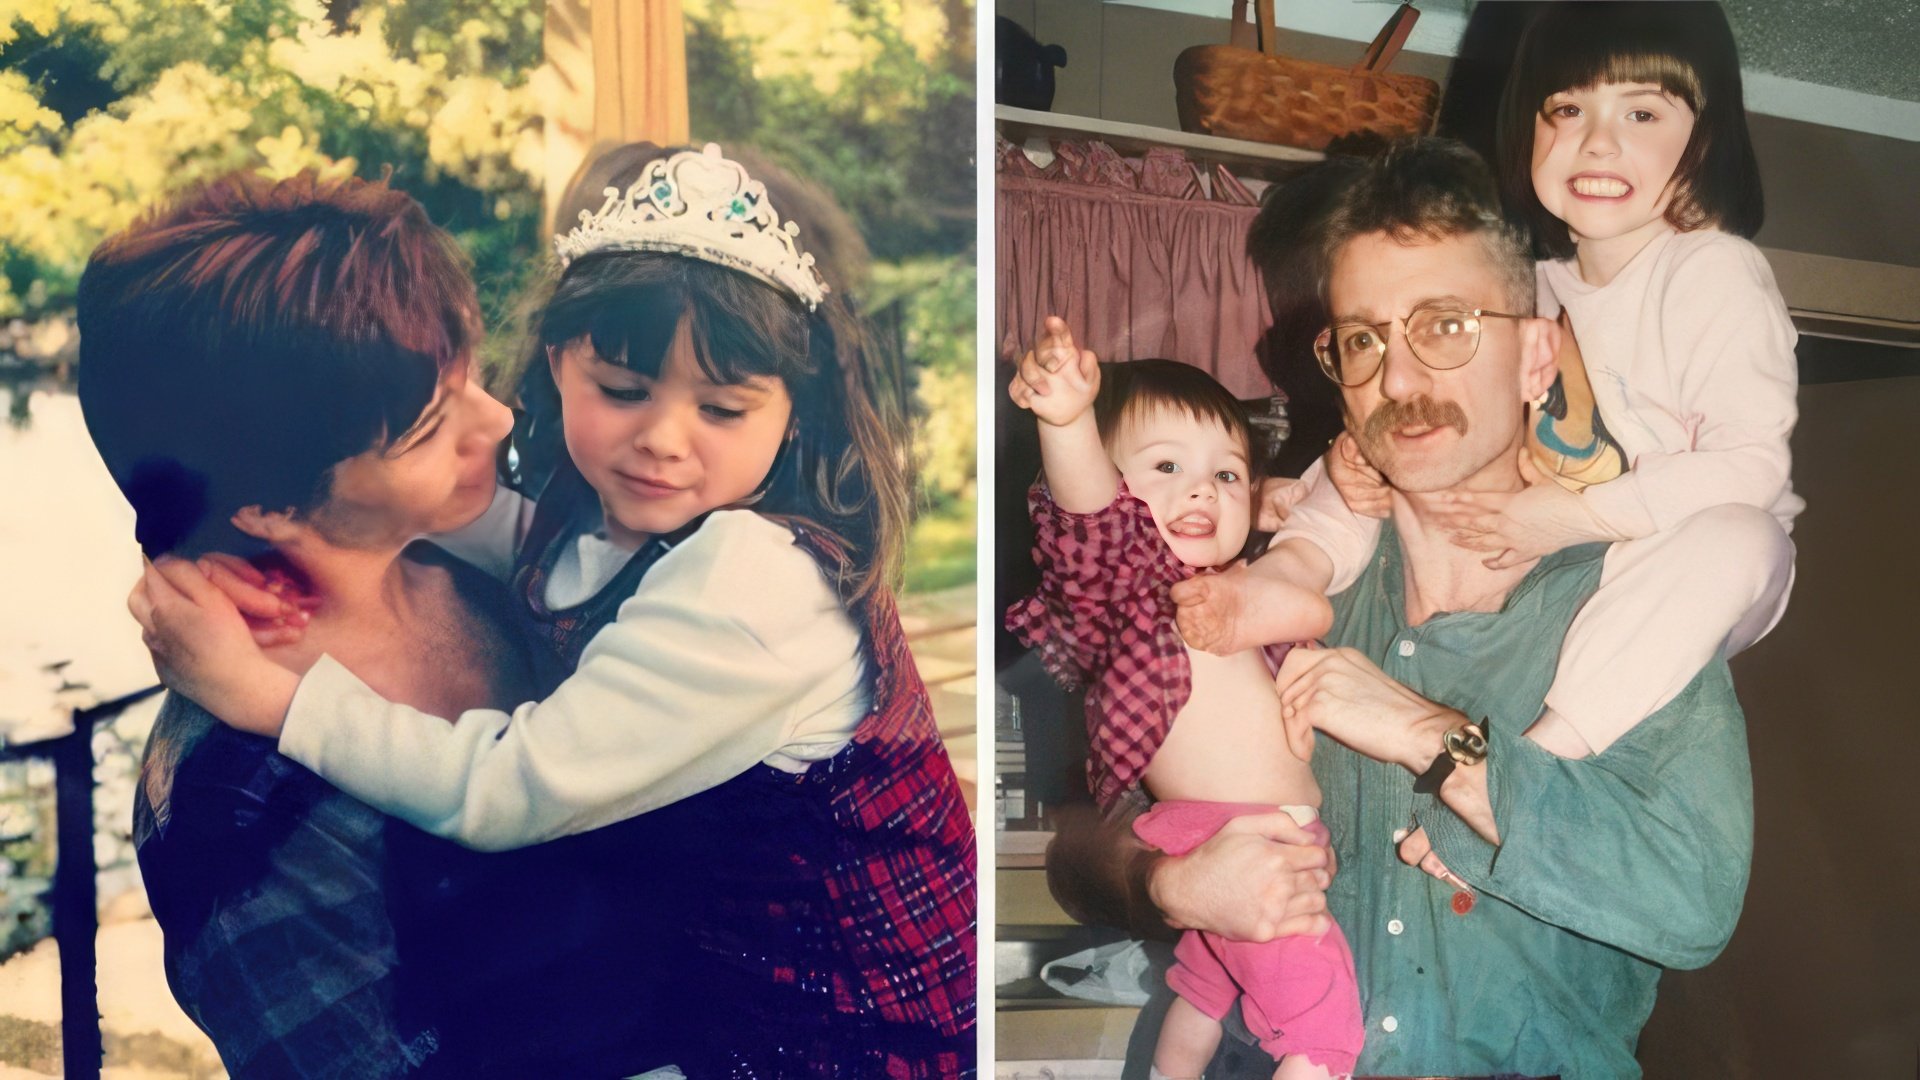 Natalia Dyer’s photos as a child, with her parents